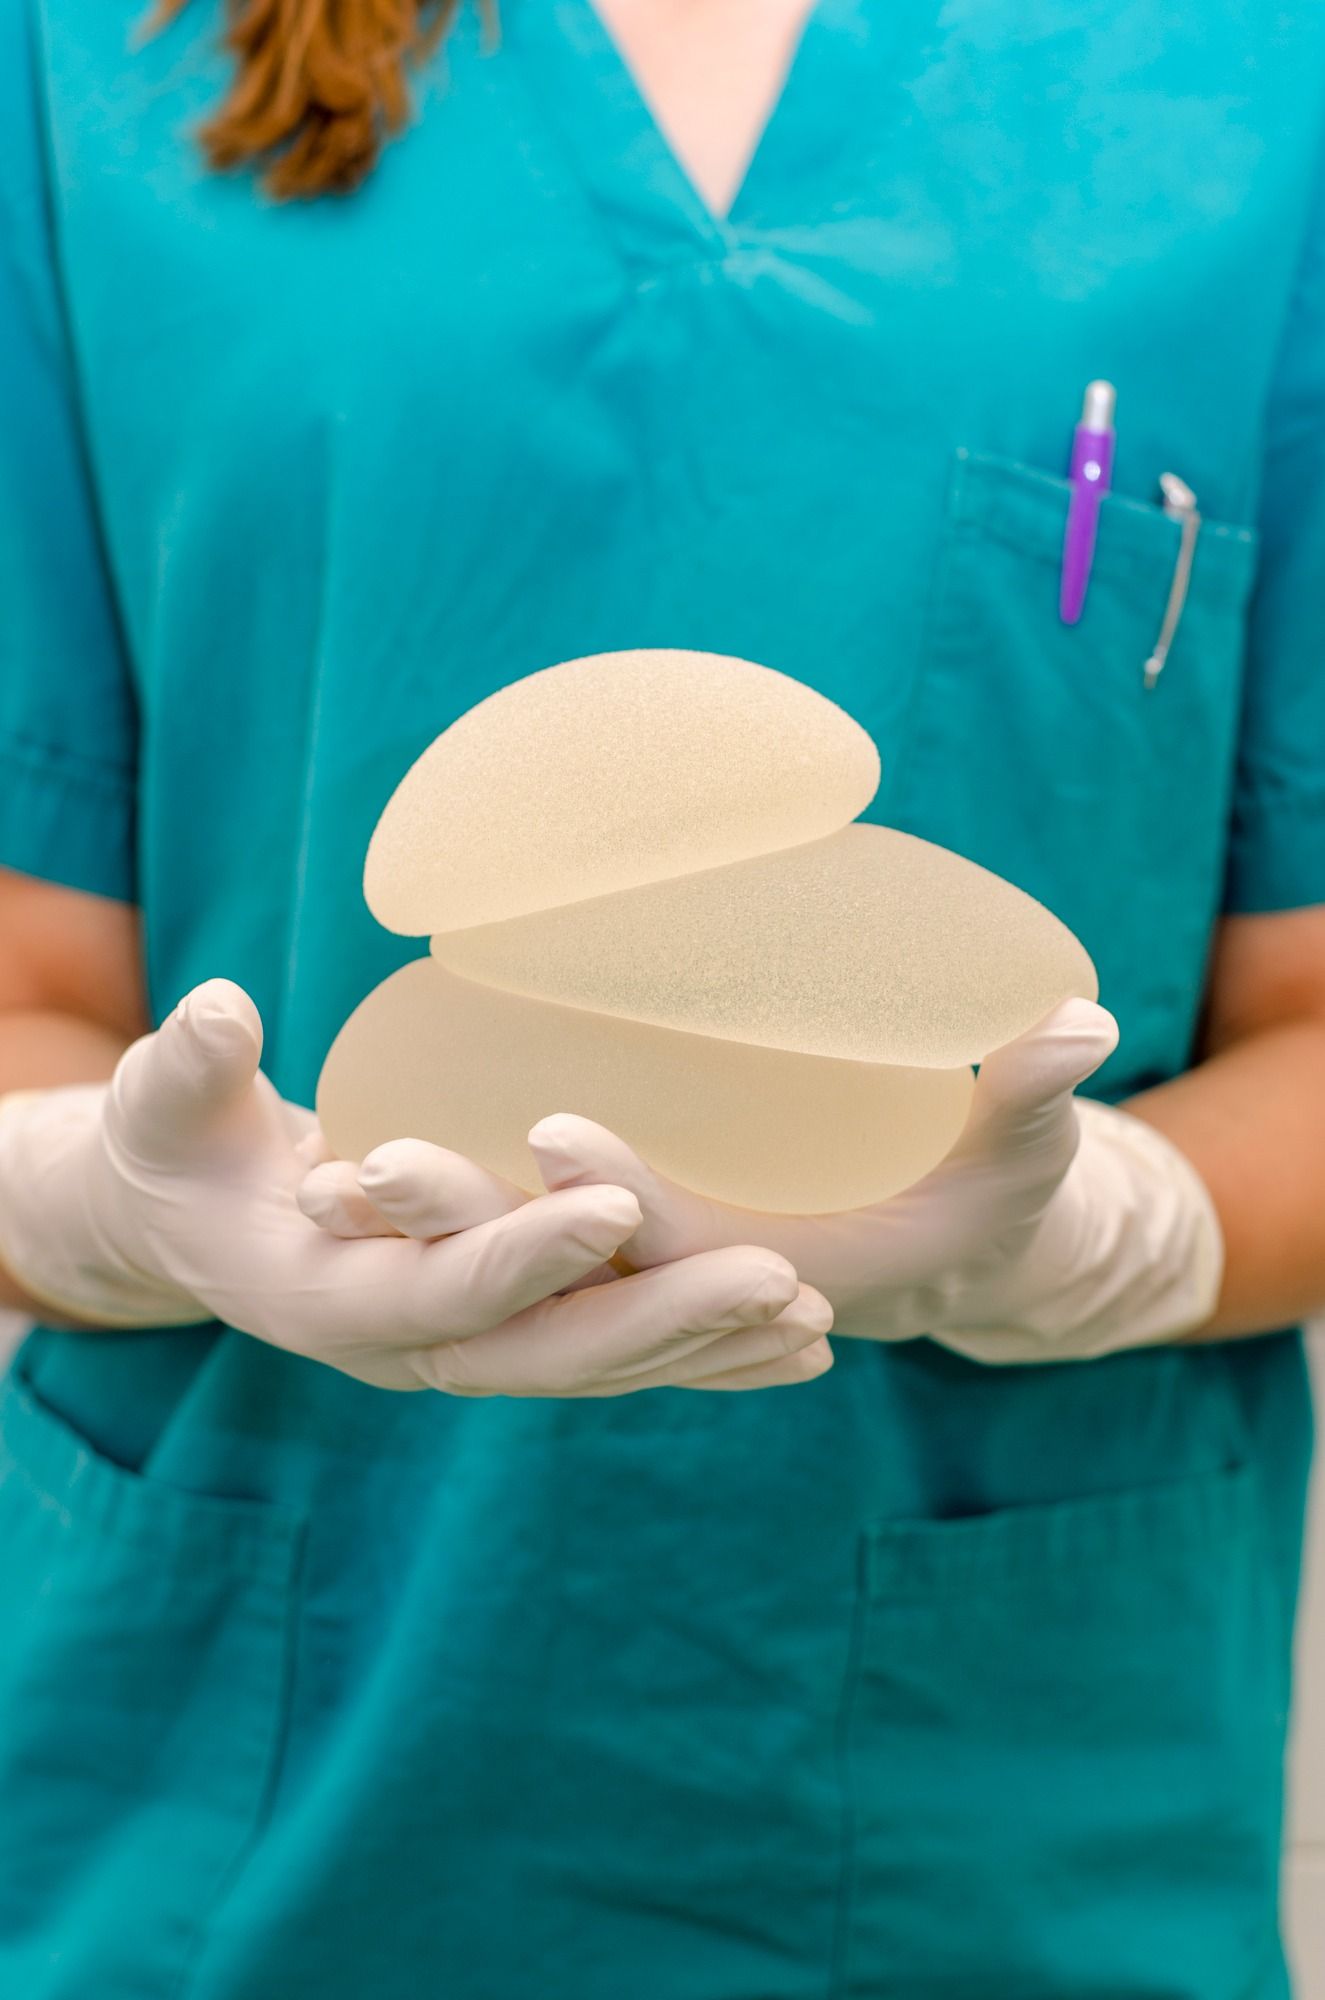 Breast implants regarding the Allergan class action lawsuit filed